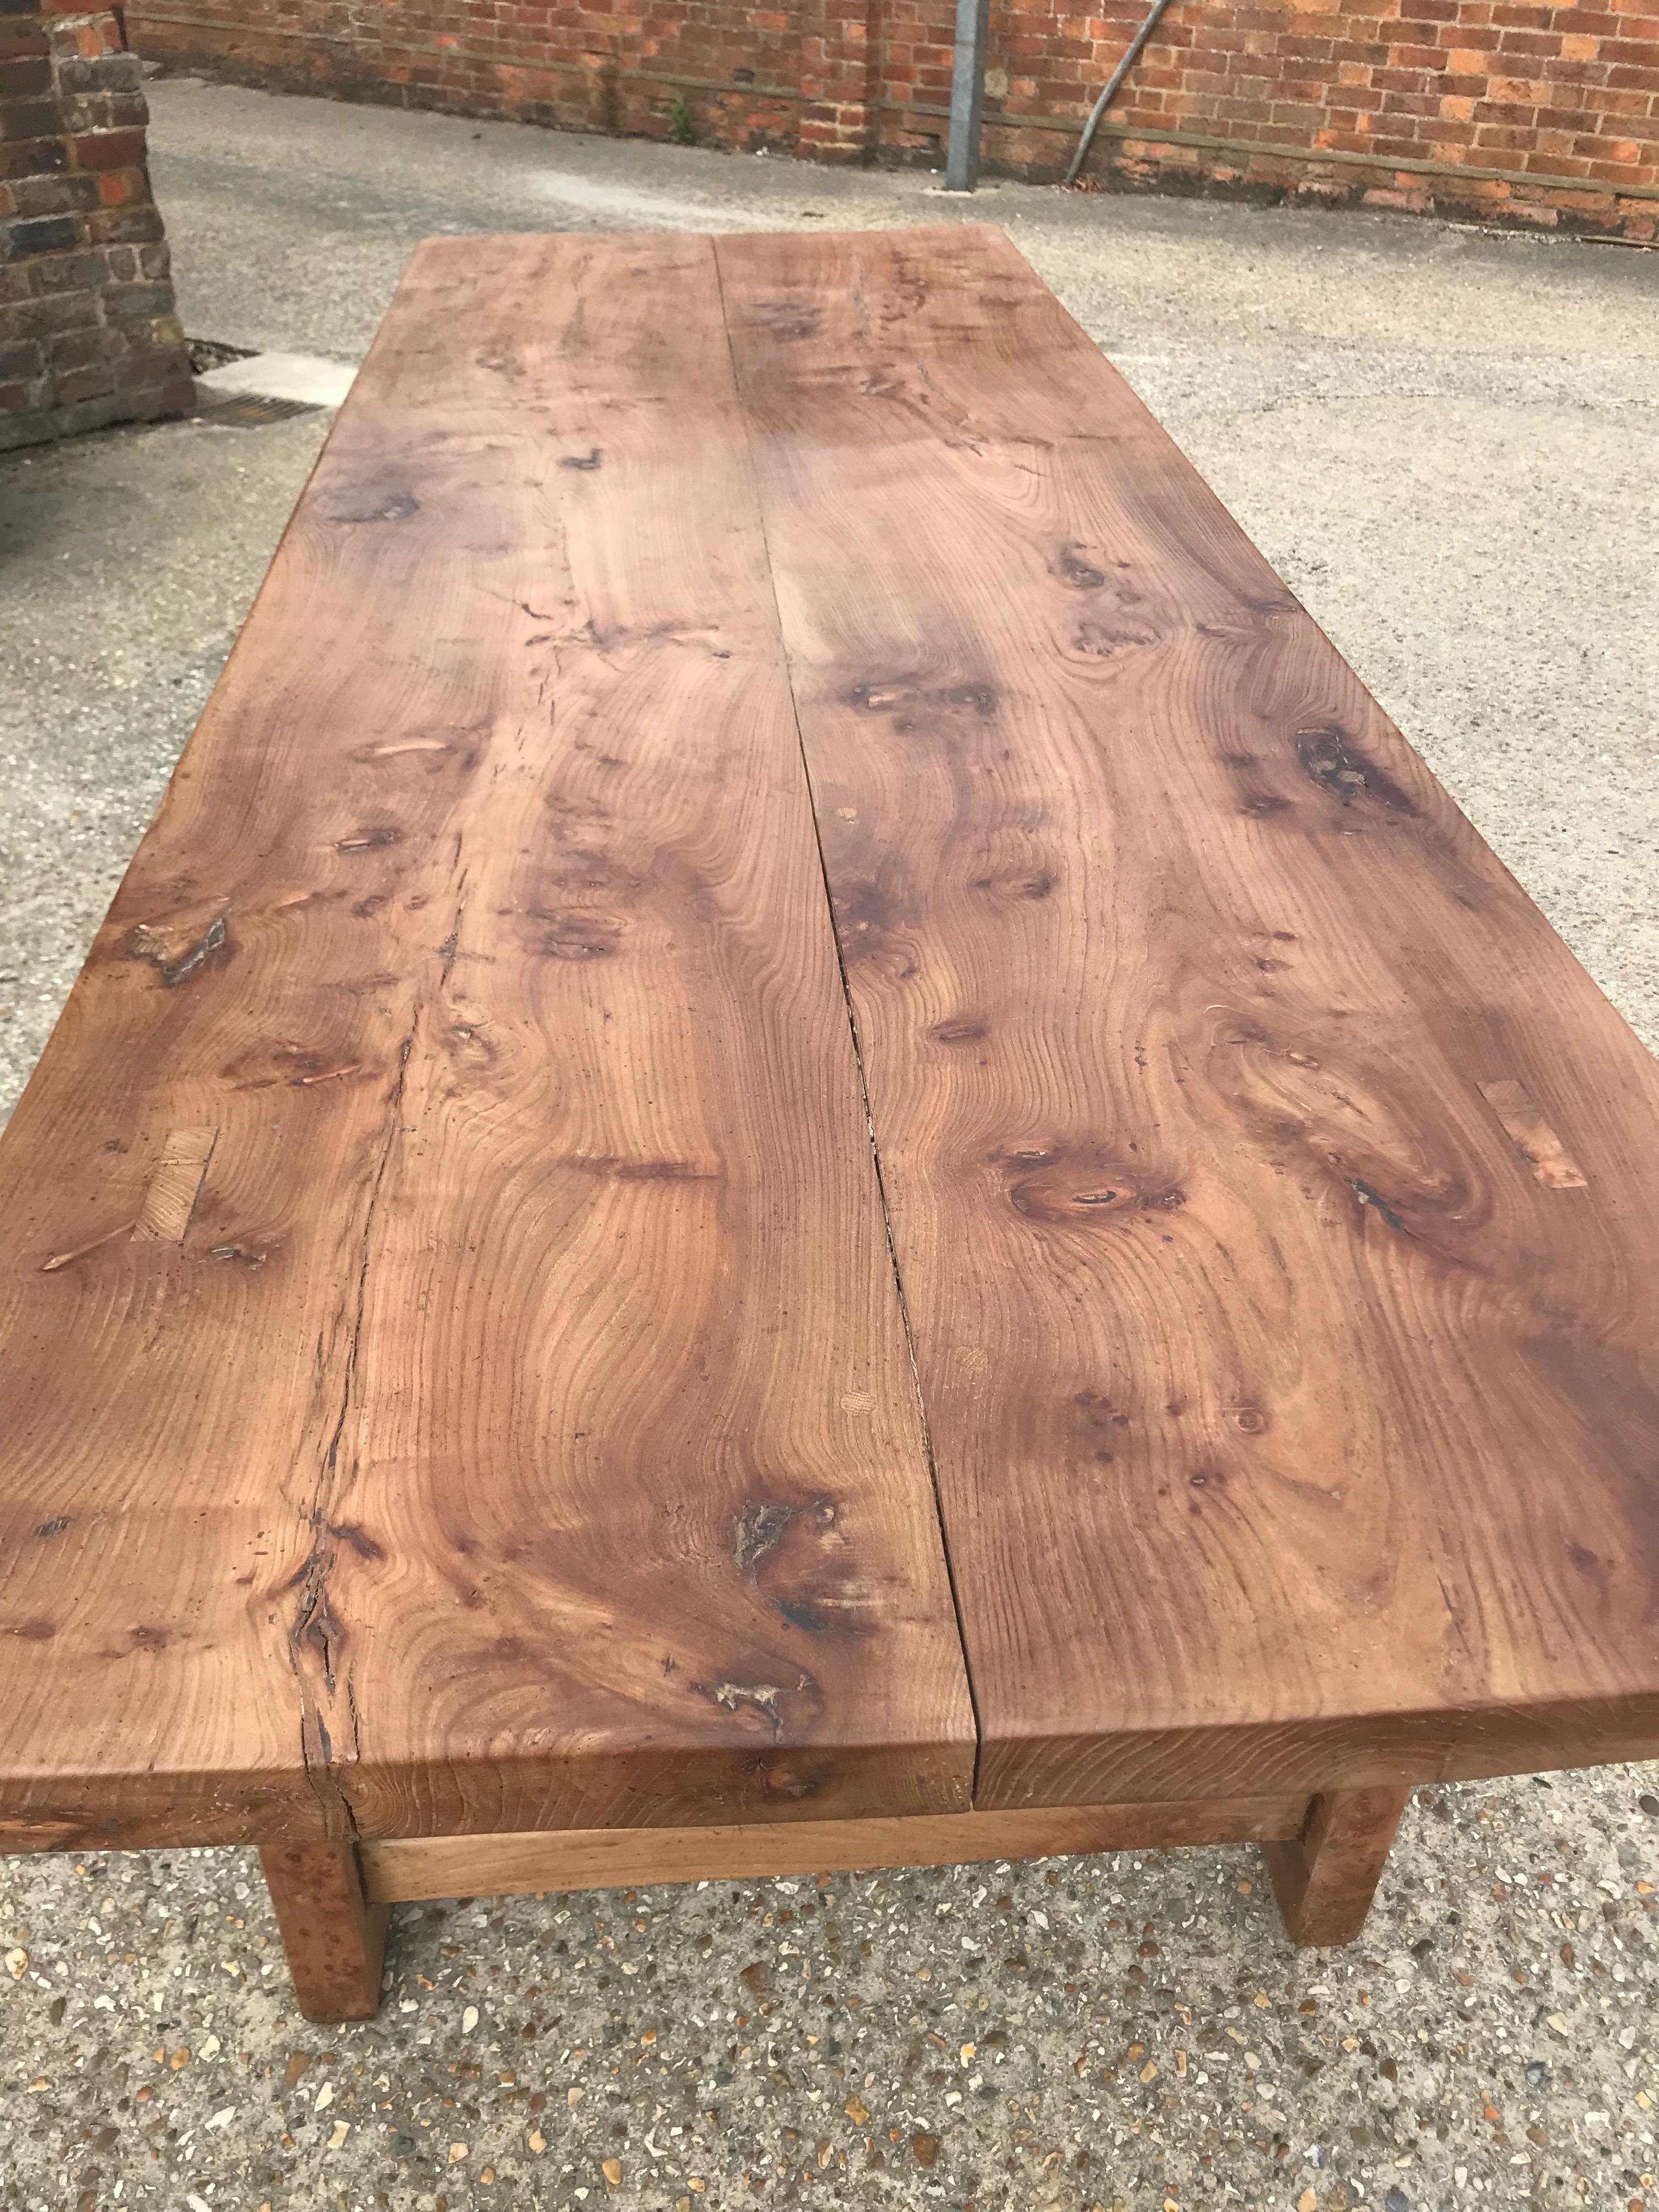 Large rustic elm French farmhouse table early 20th century. Stunning figured two plank top and stands on four sturdy legs with end stretcher. Beautiful color and patina. 

Measurements:
H 30in (76.2cm)
W 37.5in (95.3cm)
L 112in